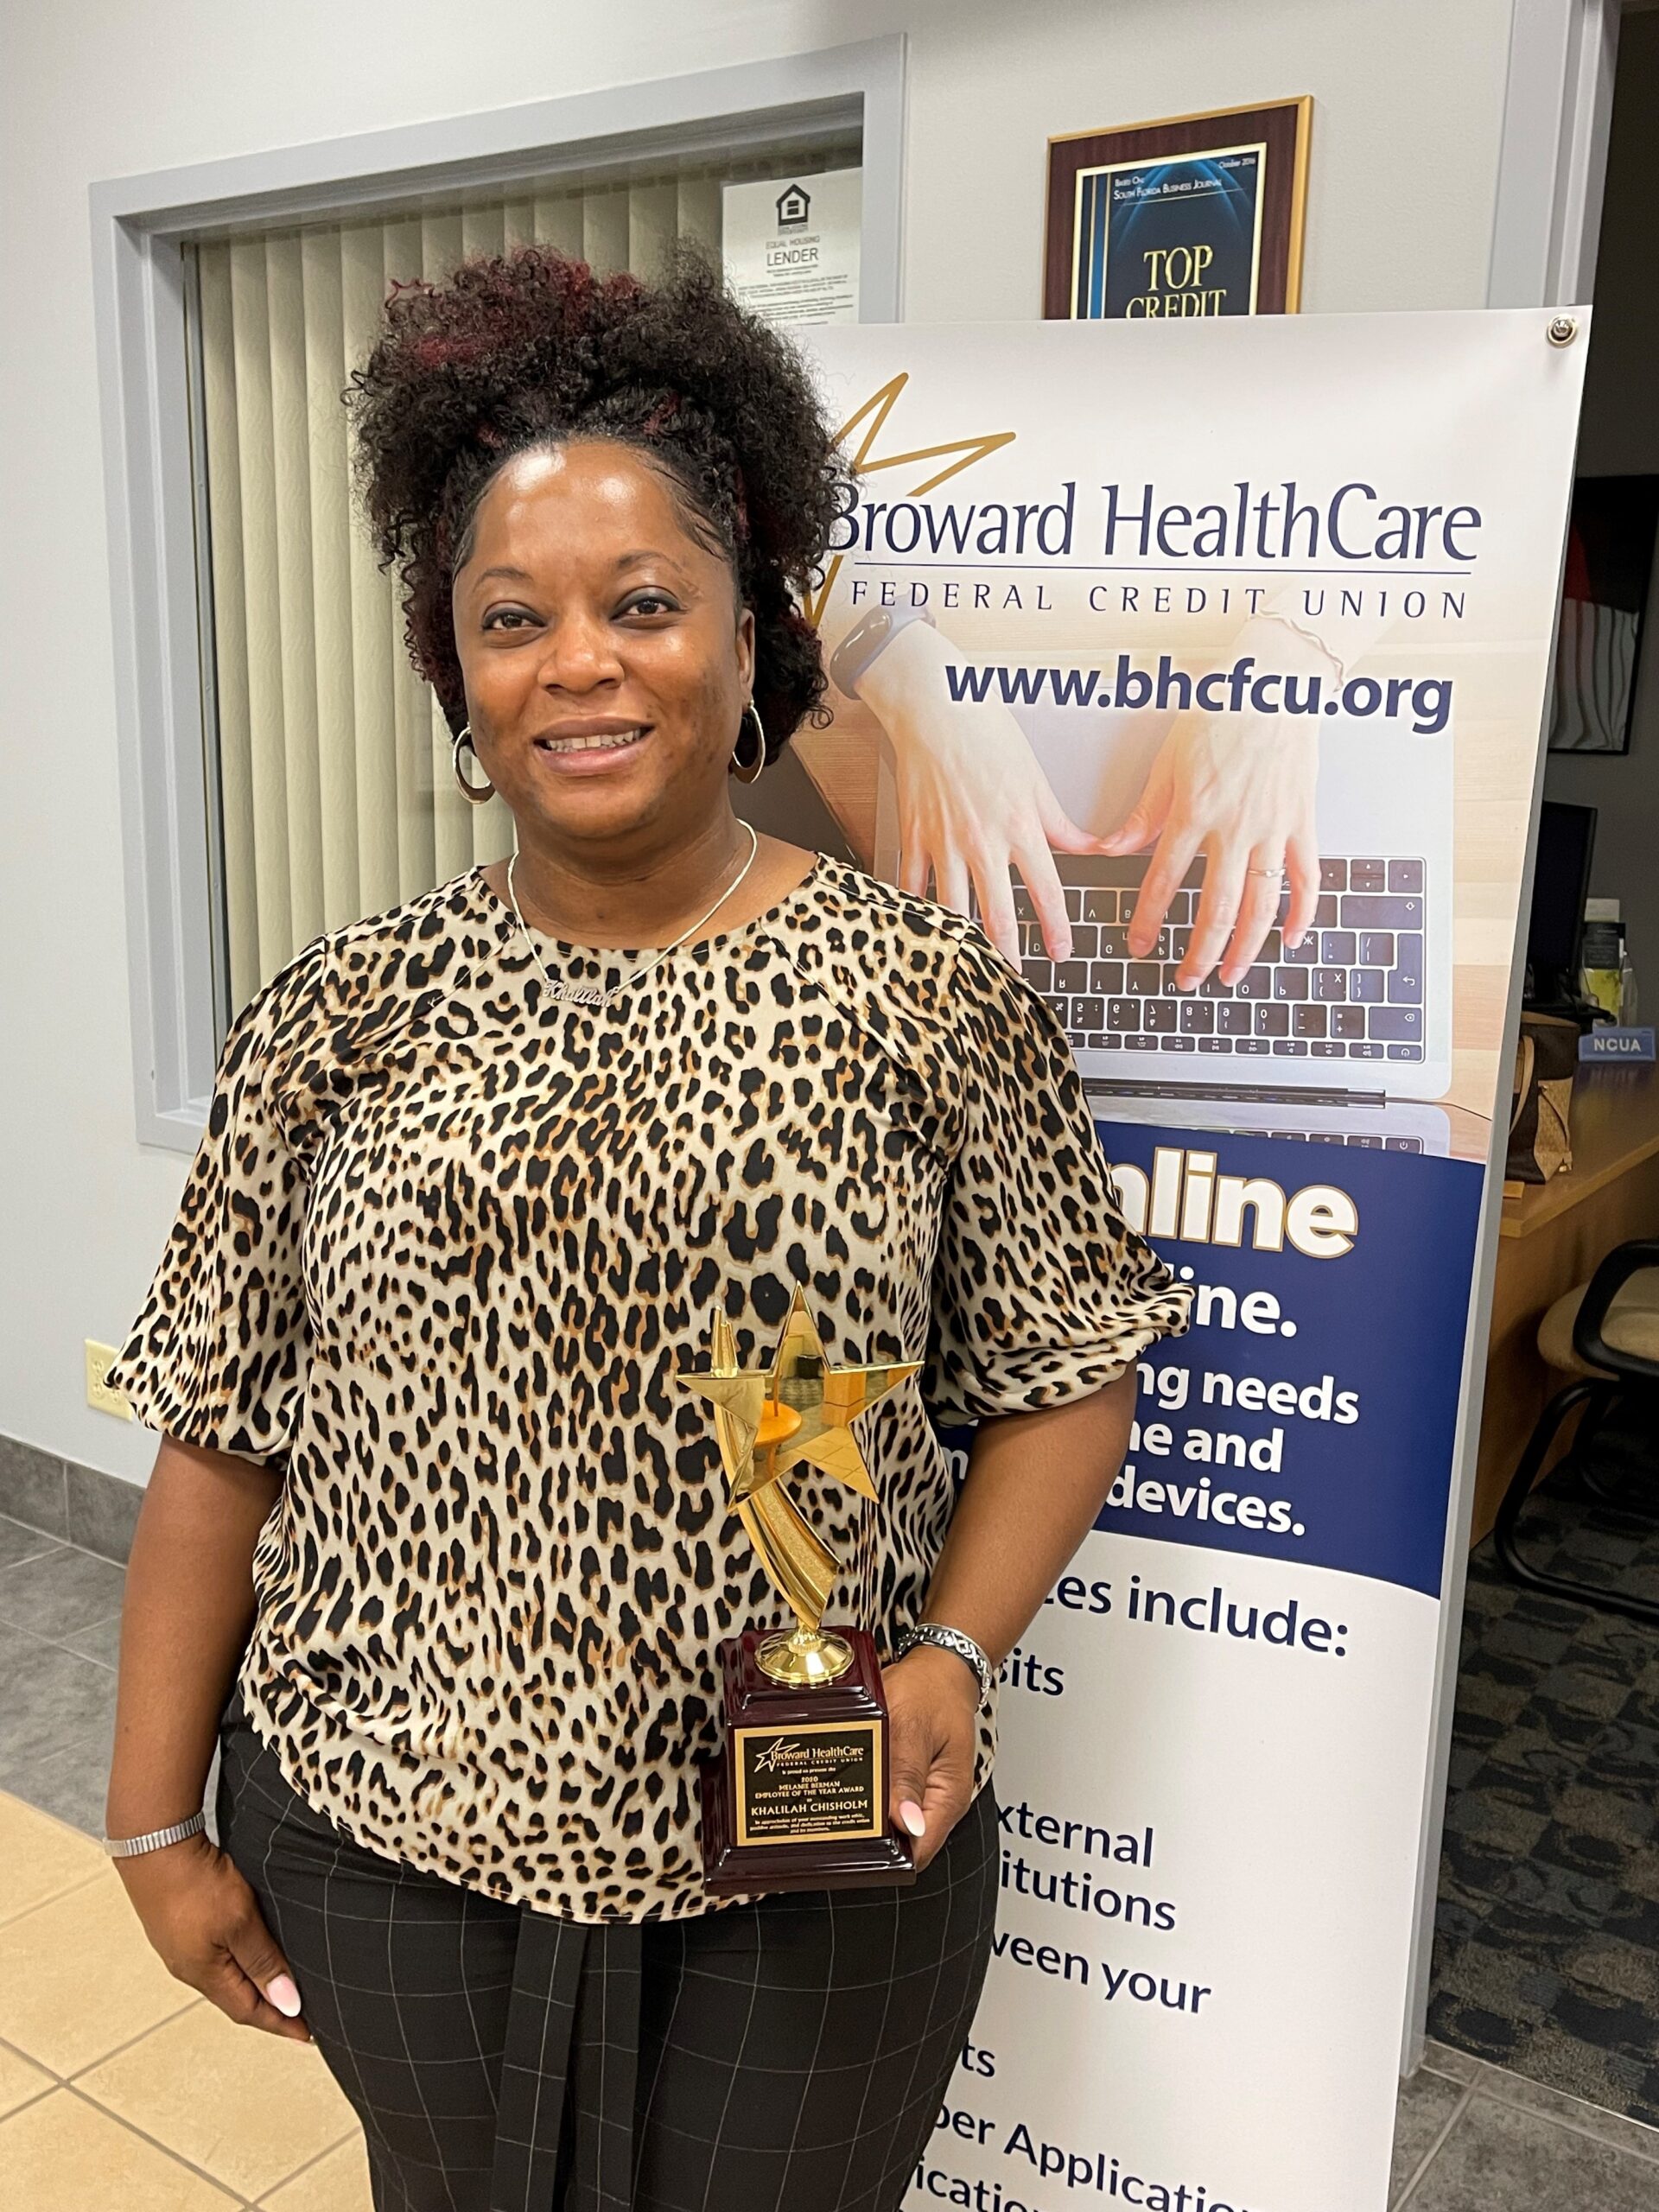 Khalilah Chisholm Receives the Employee of the Year Award from Broward HealthCare Federal Credit Union